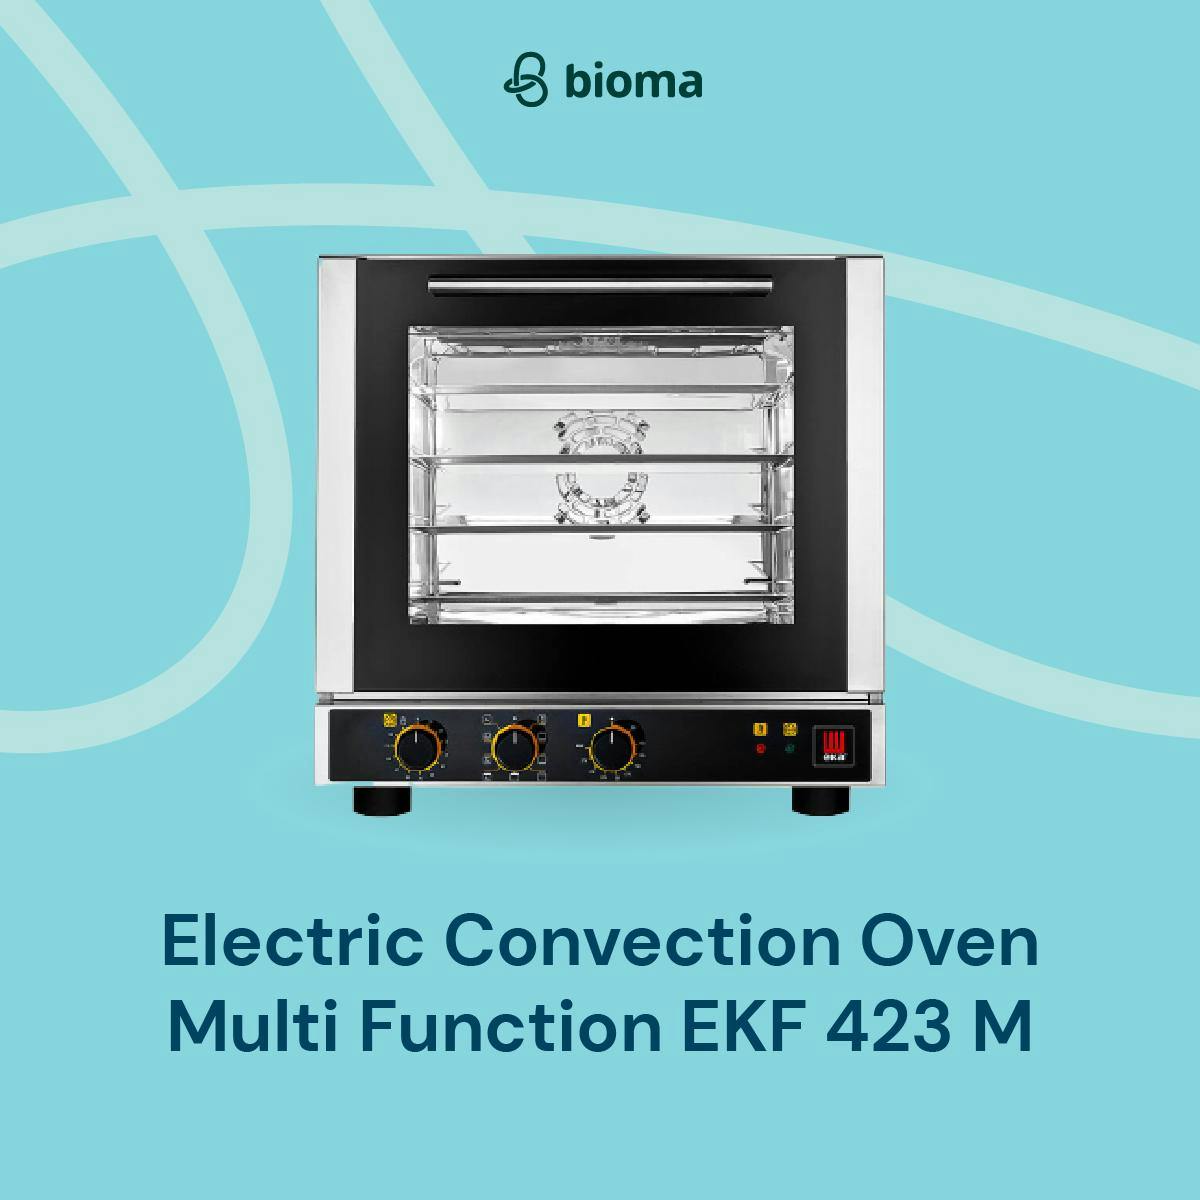 Electric Convection Oven Multi Function EKF 423 M